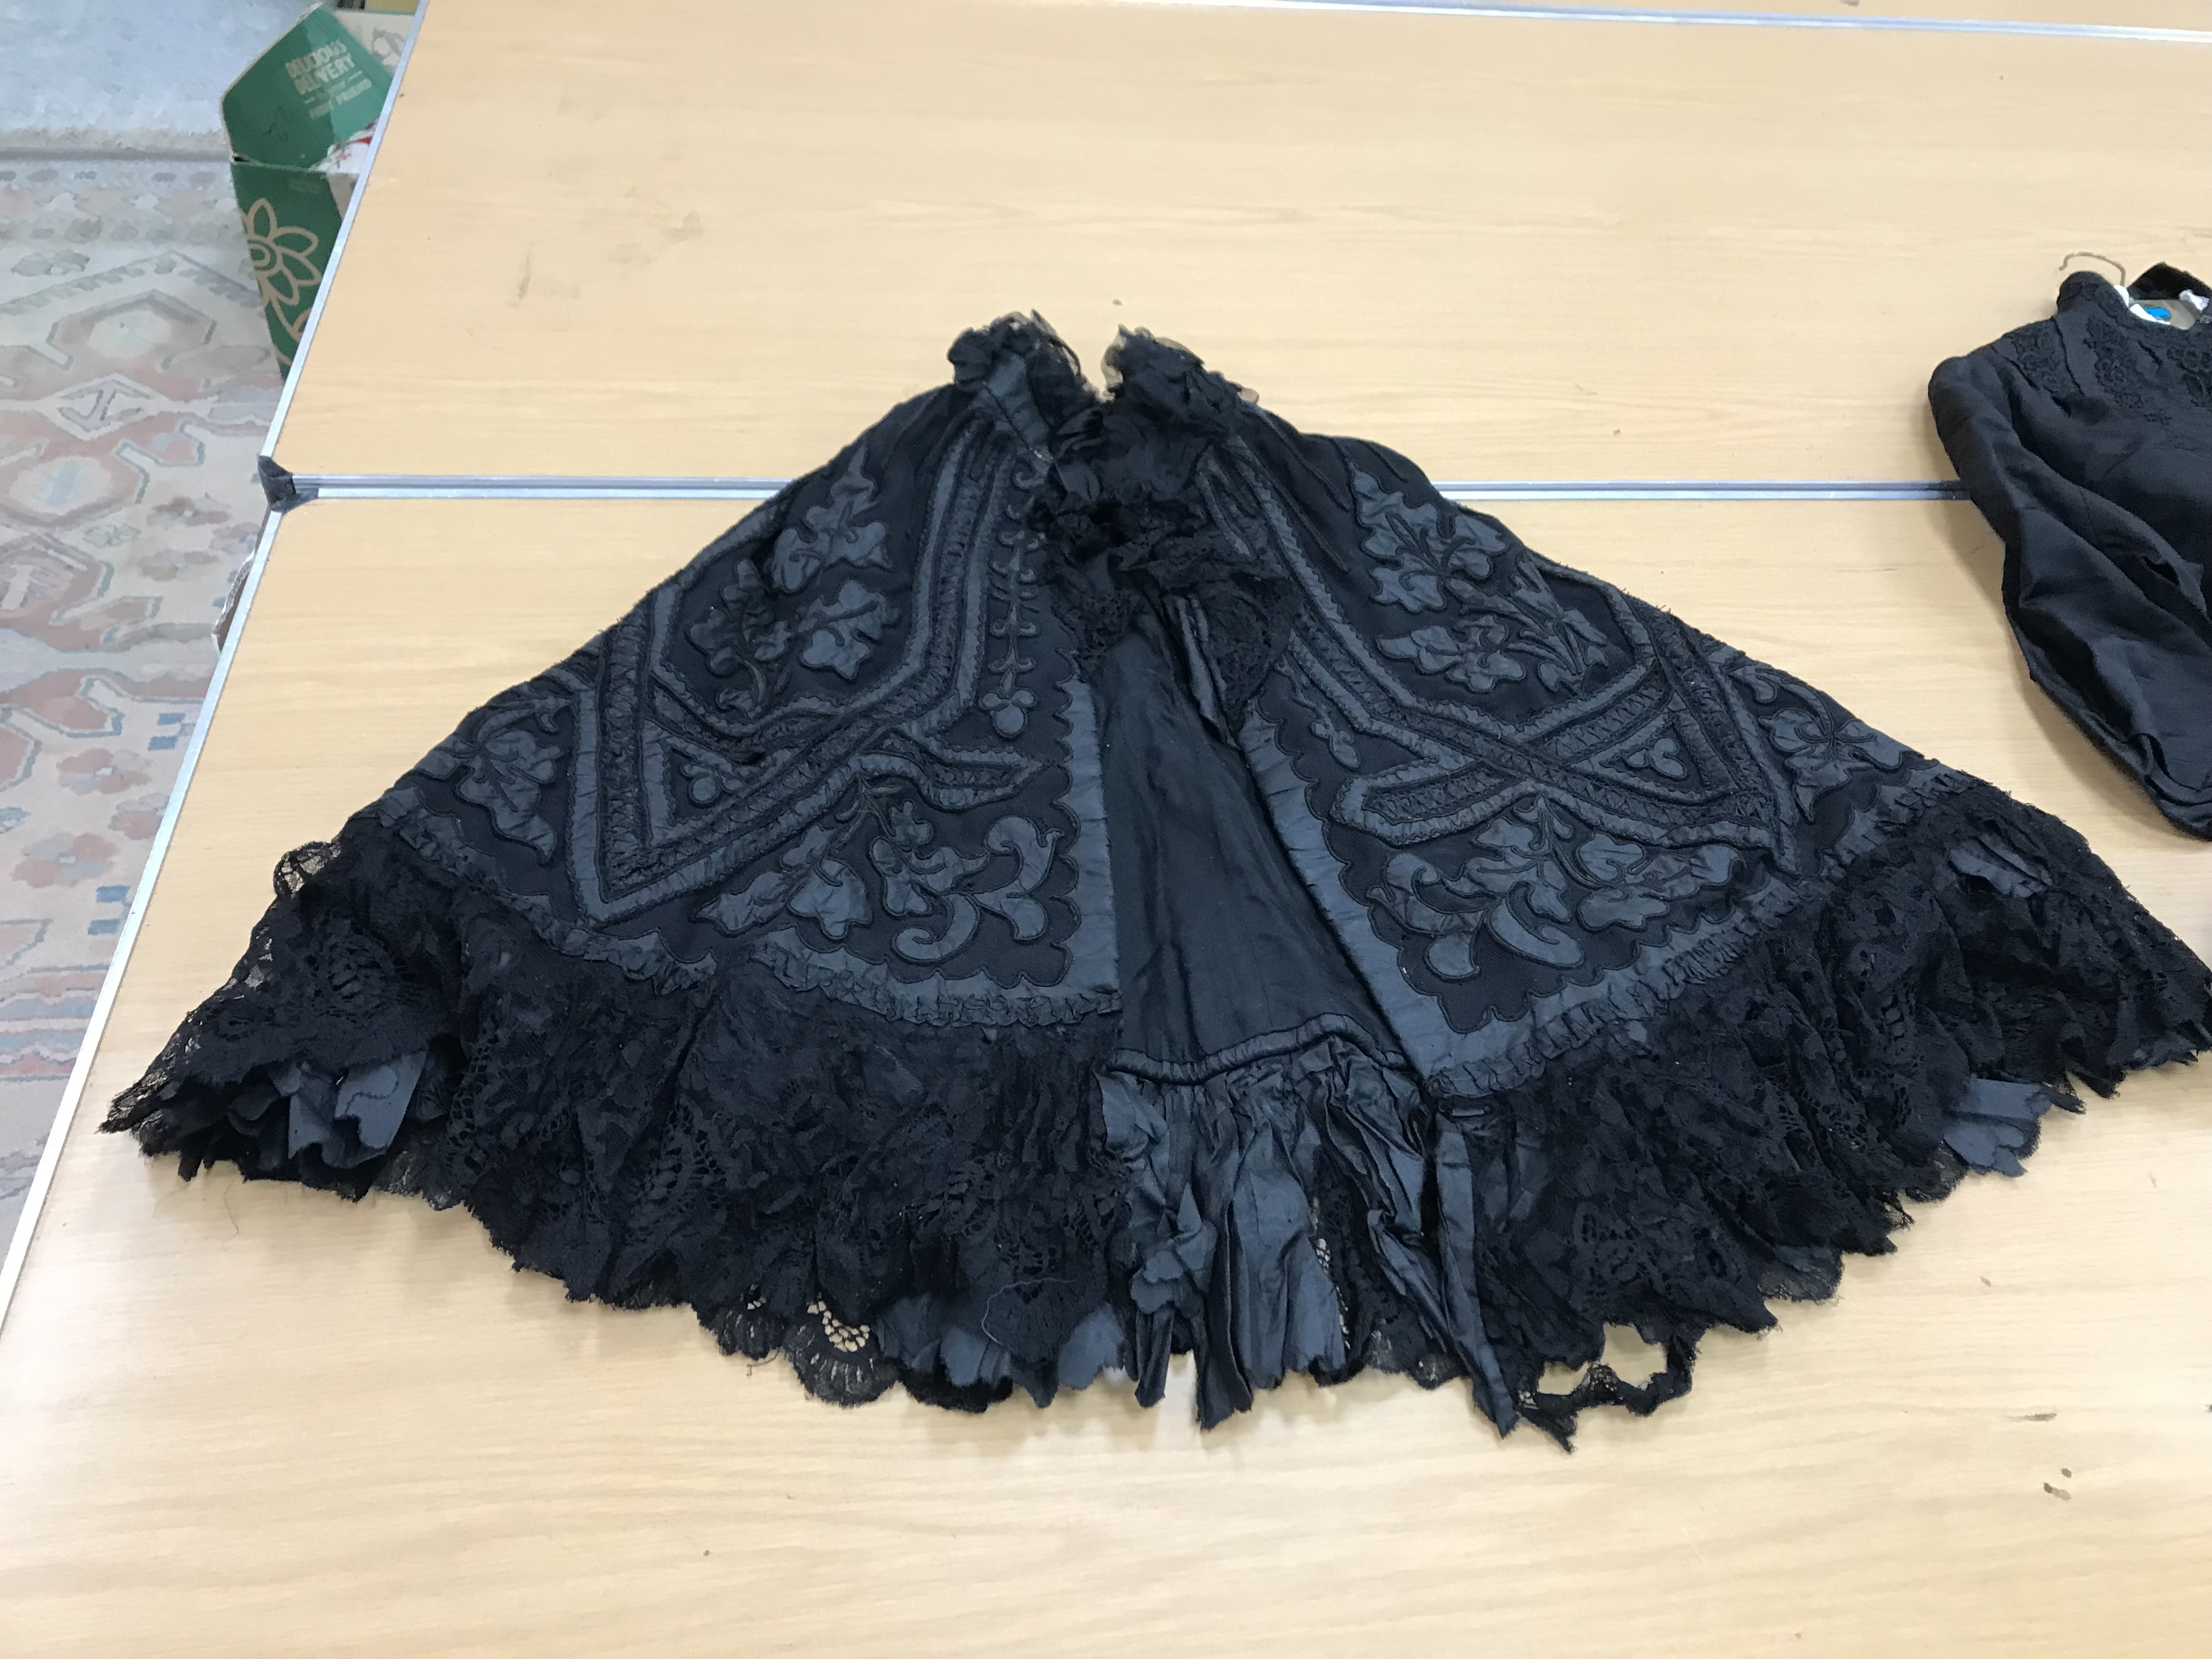 A Victorian mourning cape with applique decoration and lace edge together with a Victorian style - Image 13 of 115